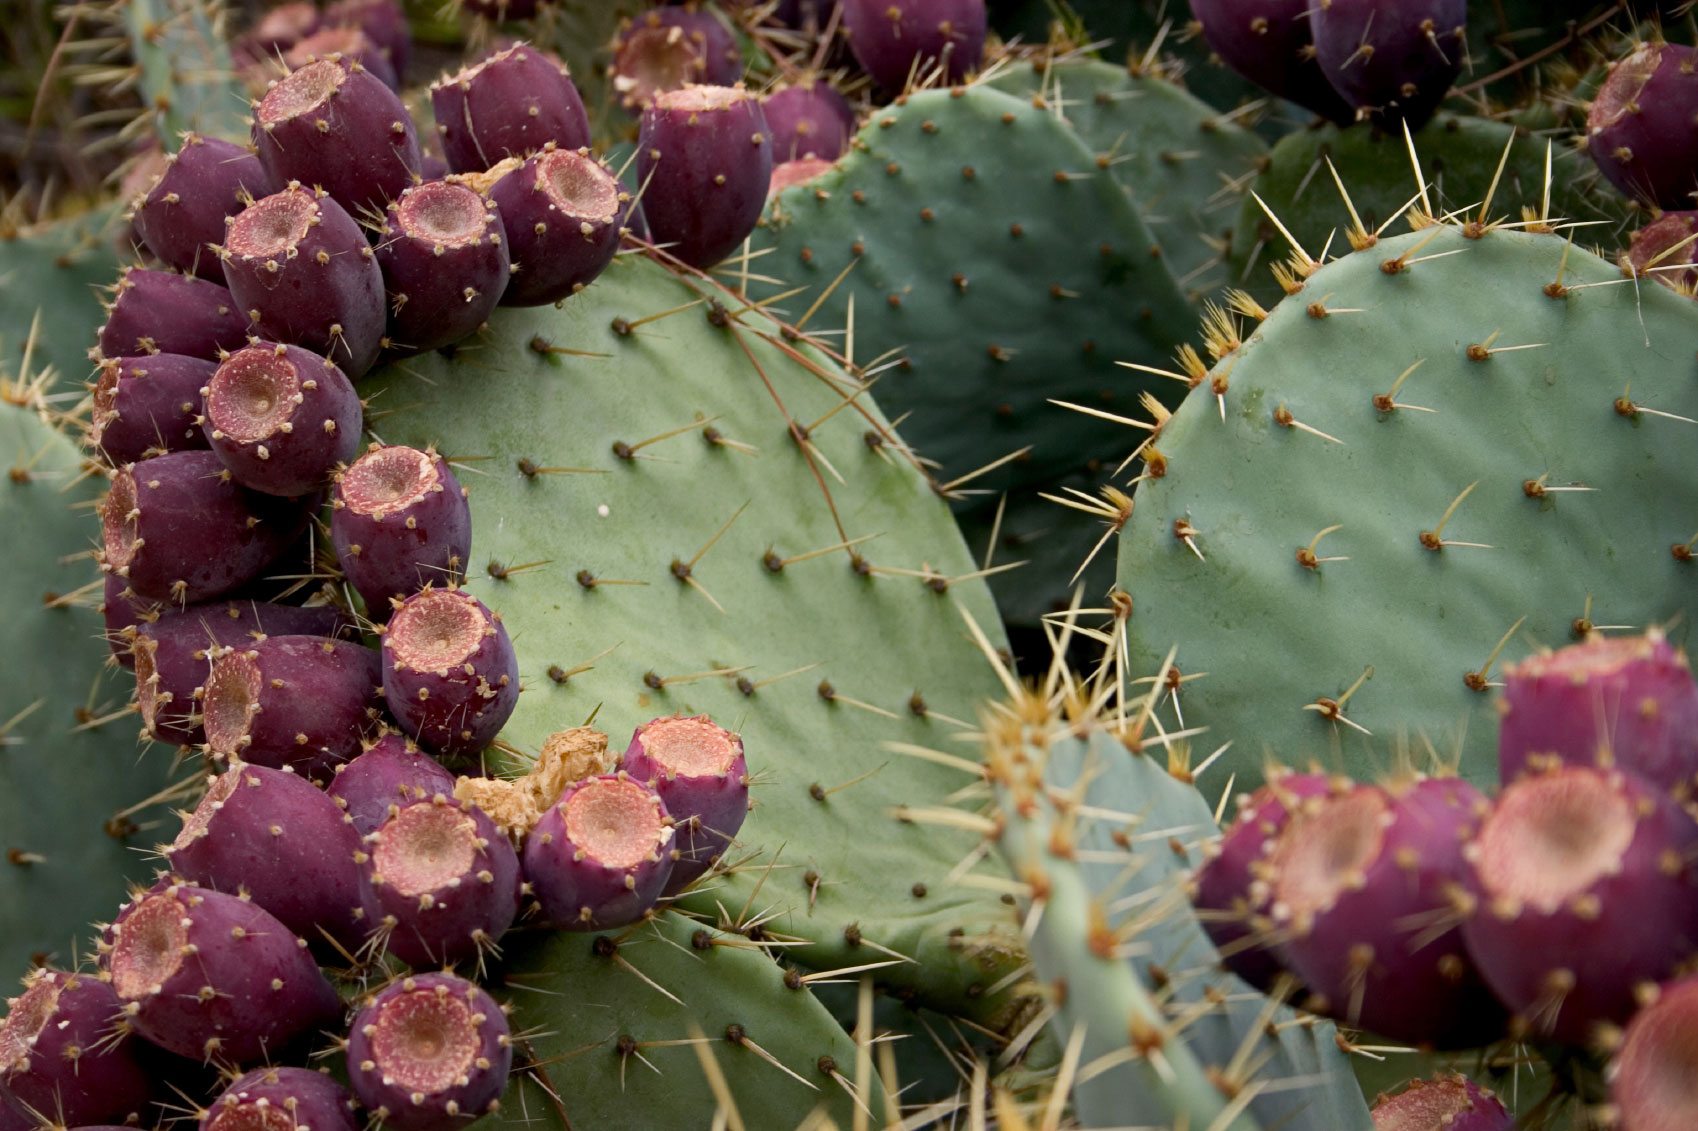 Growing Prickly Pear - Prickly Pear Plants In The Home Garden